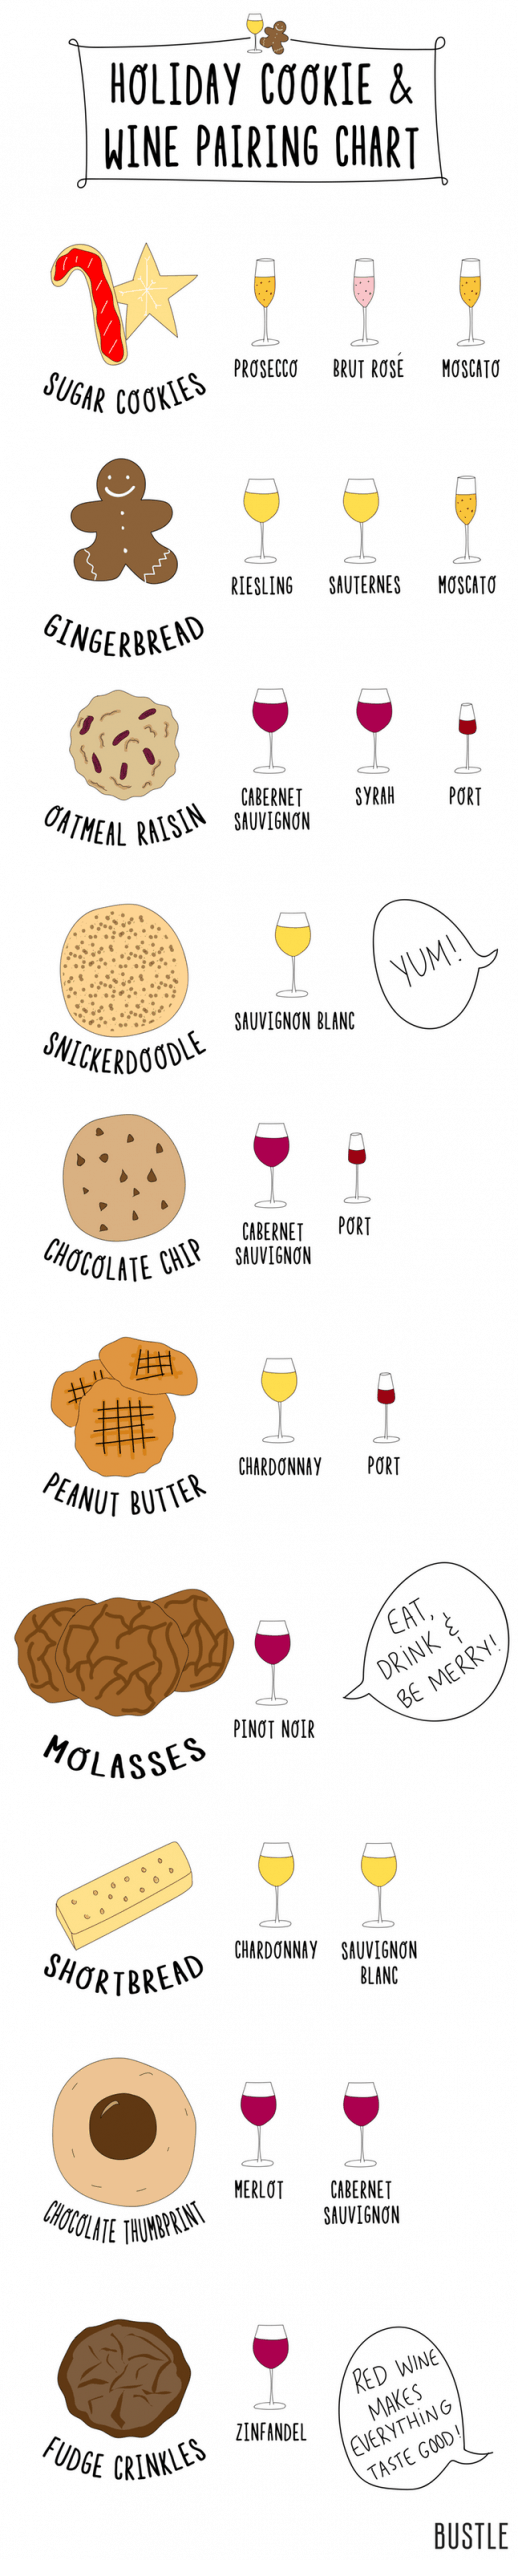 Types of cookies and the best kind of wine to pair them with